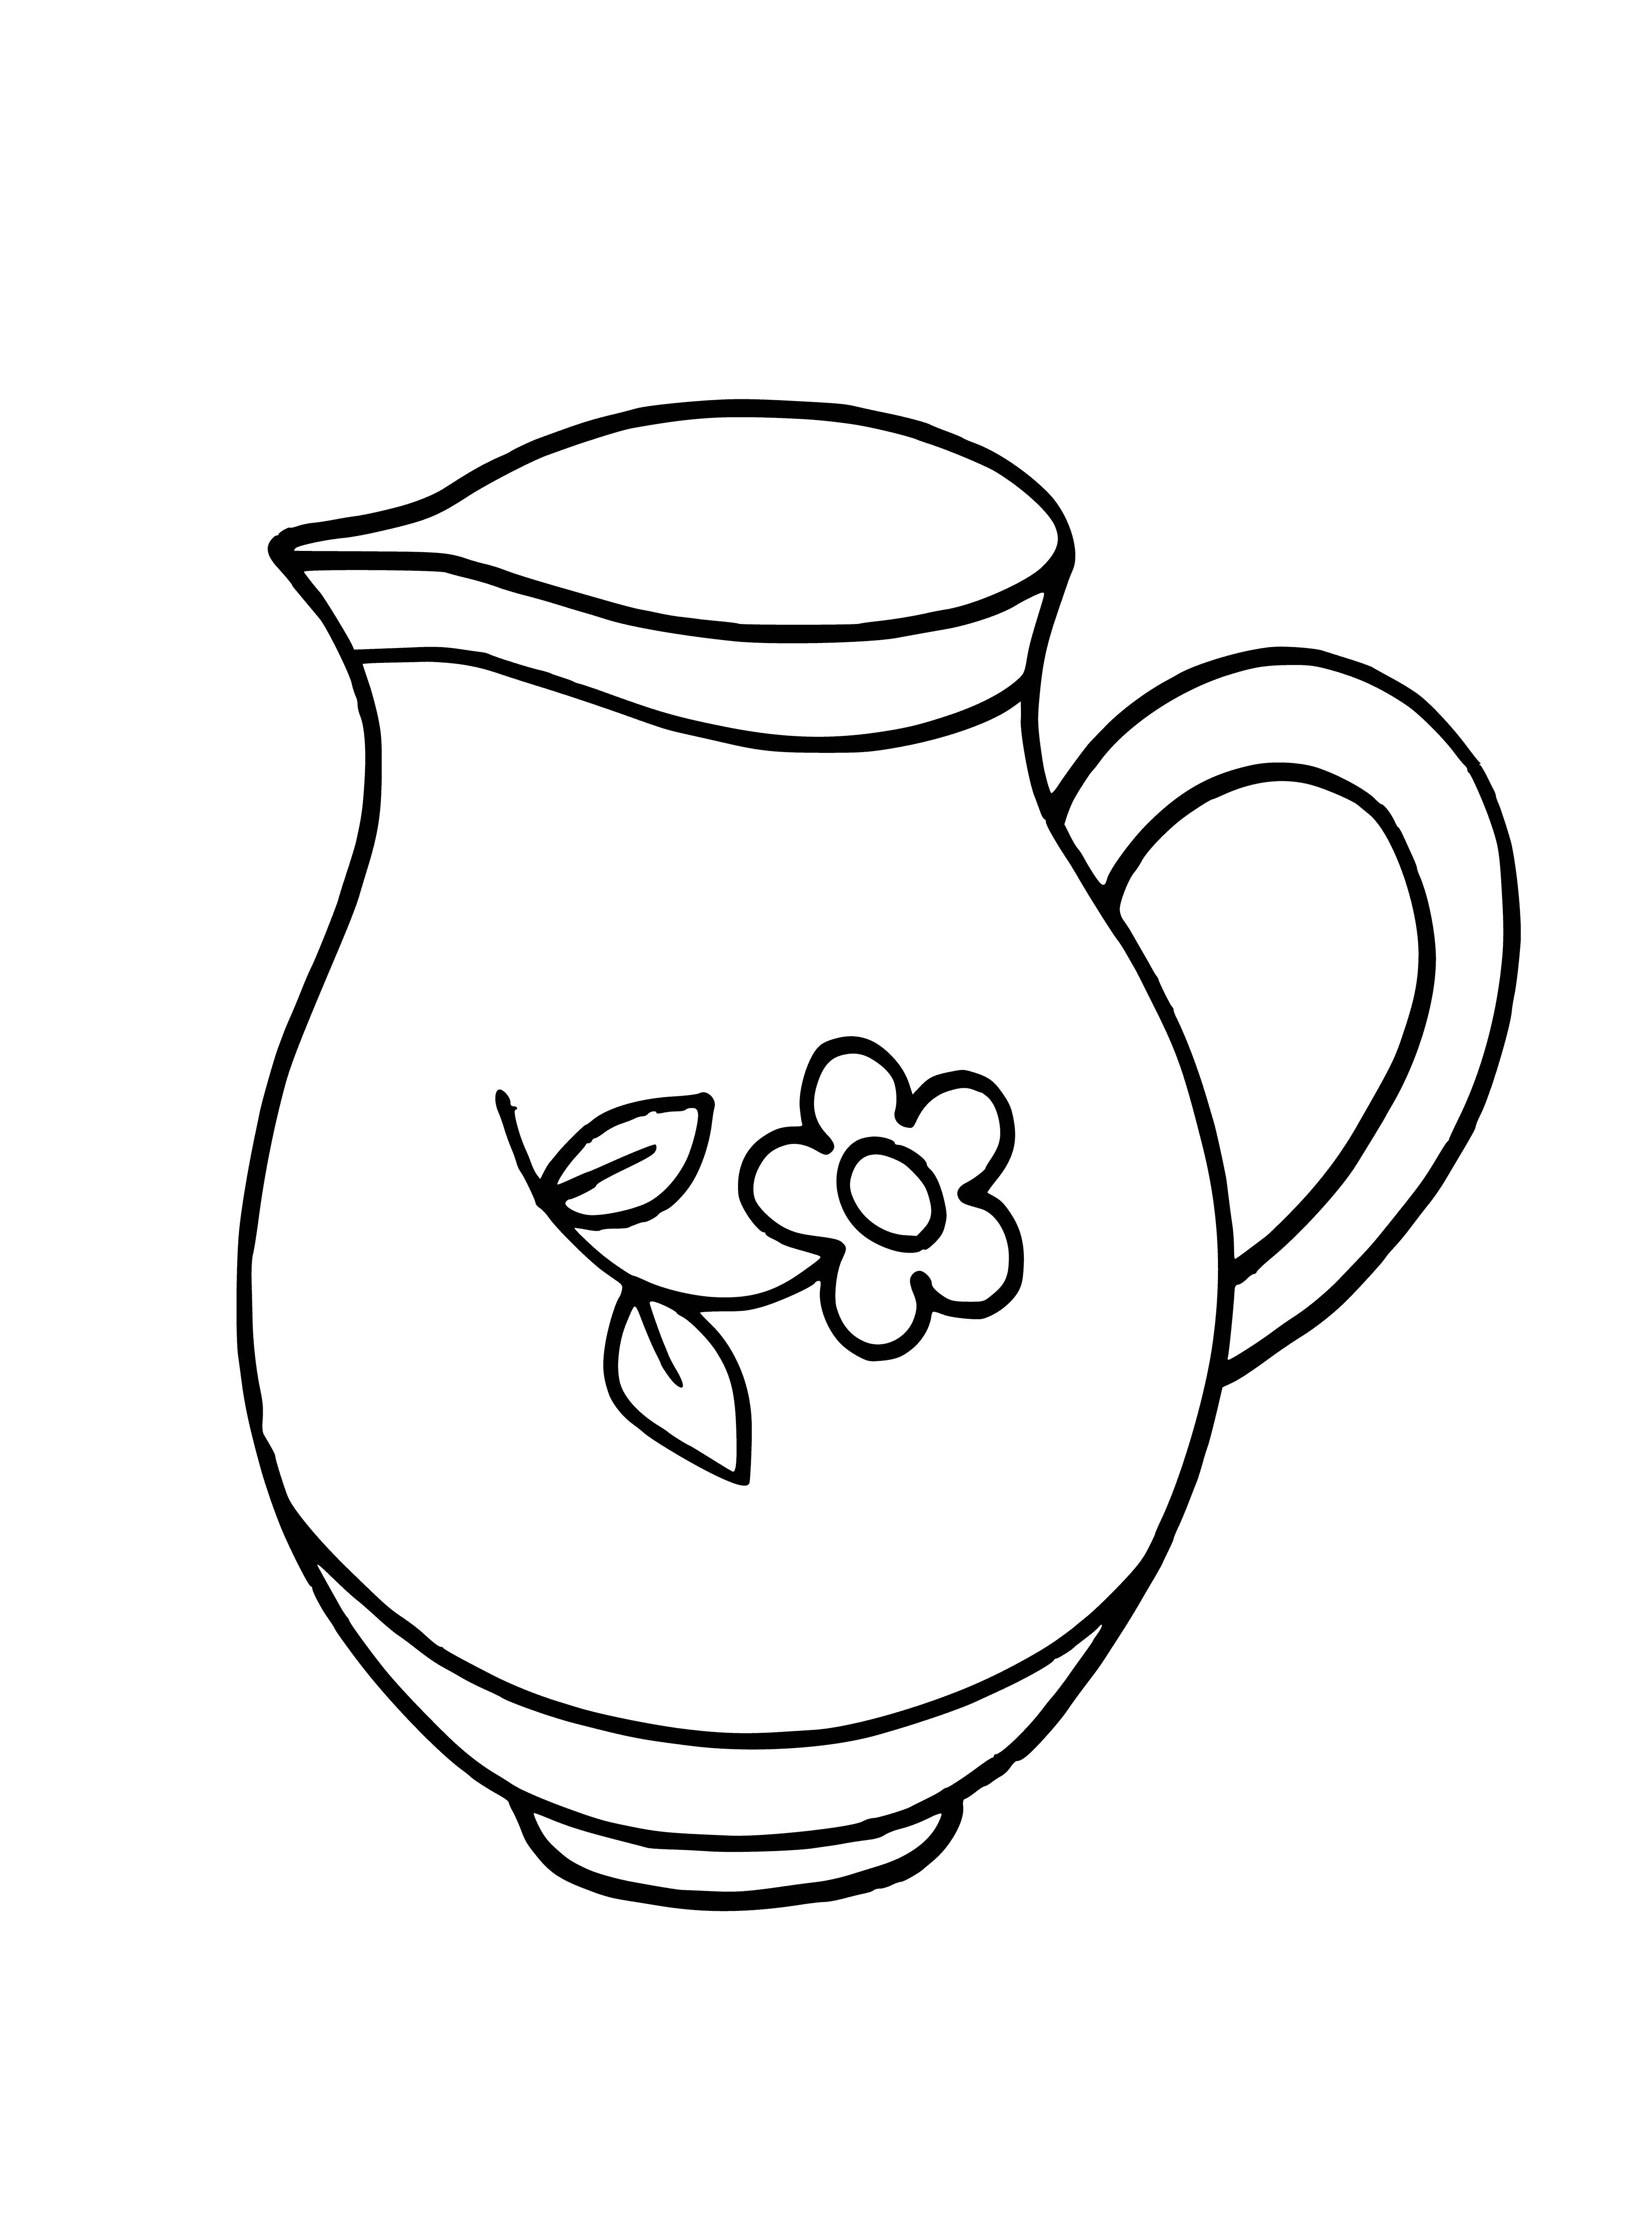 coloring page: Vintage jug with blue and white design, handle, spout, and lid. #antiques #ceramics